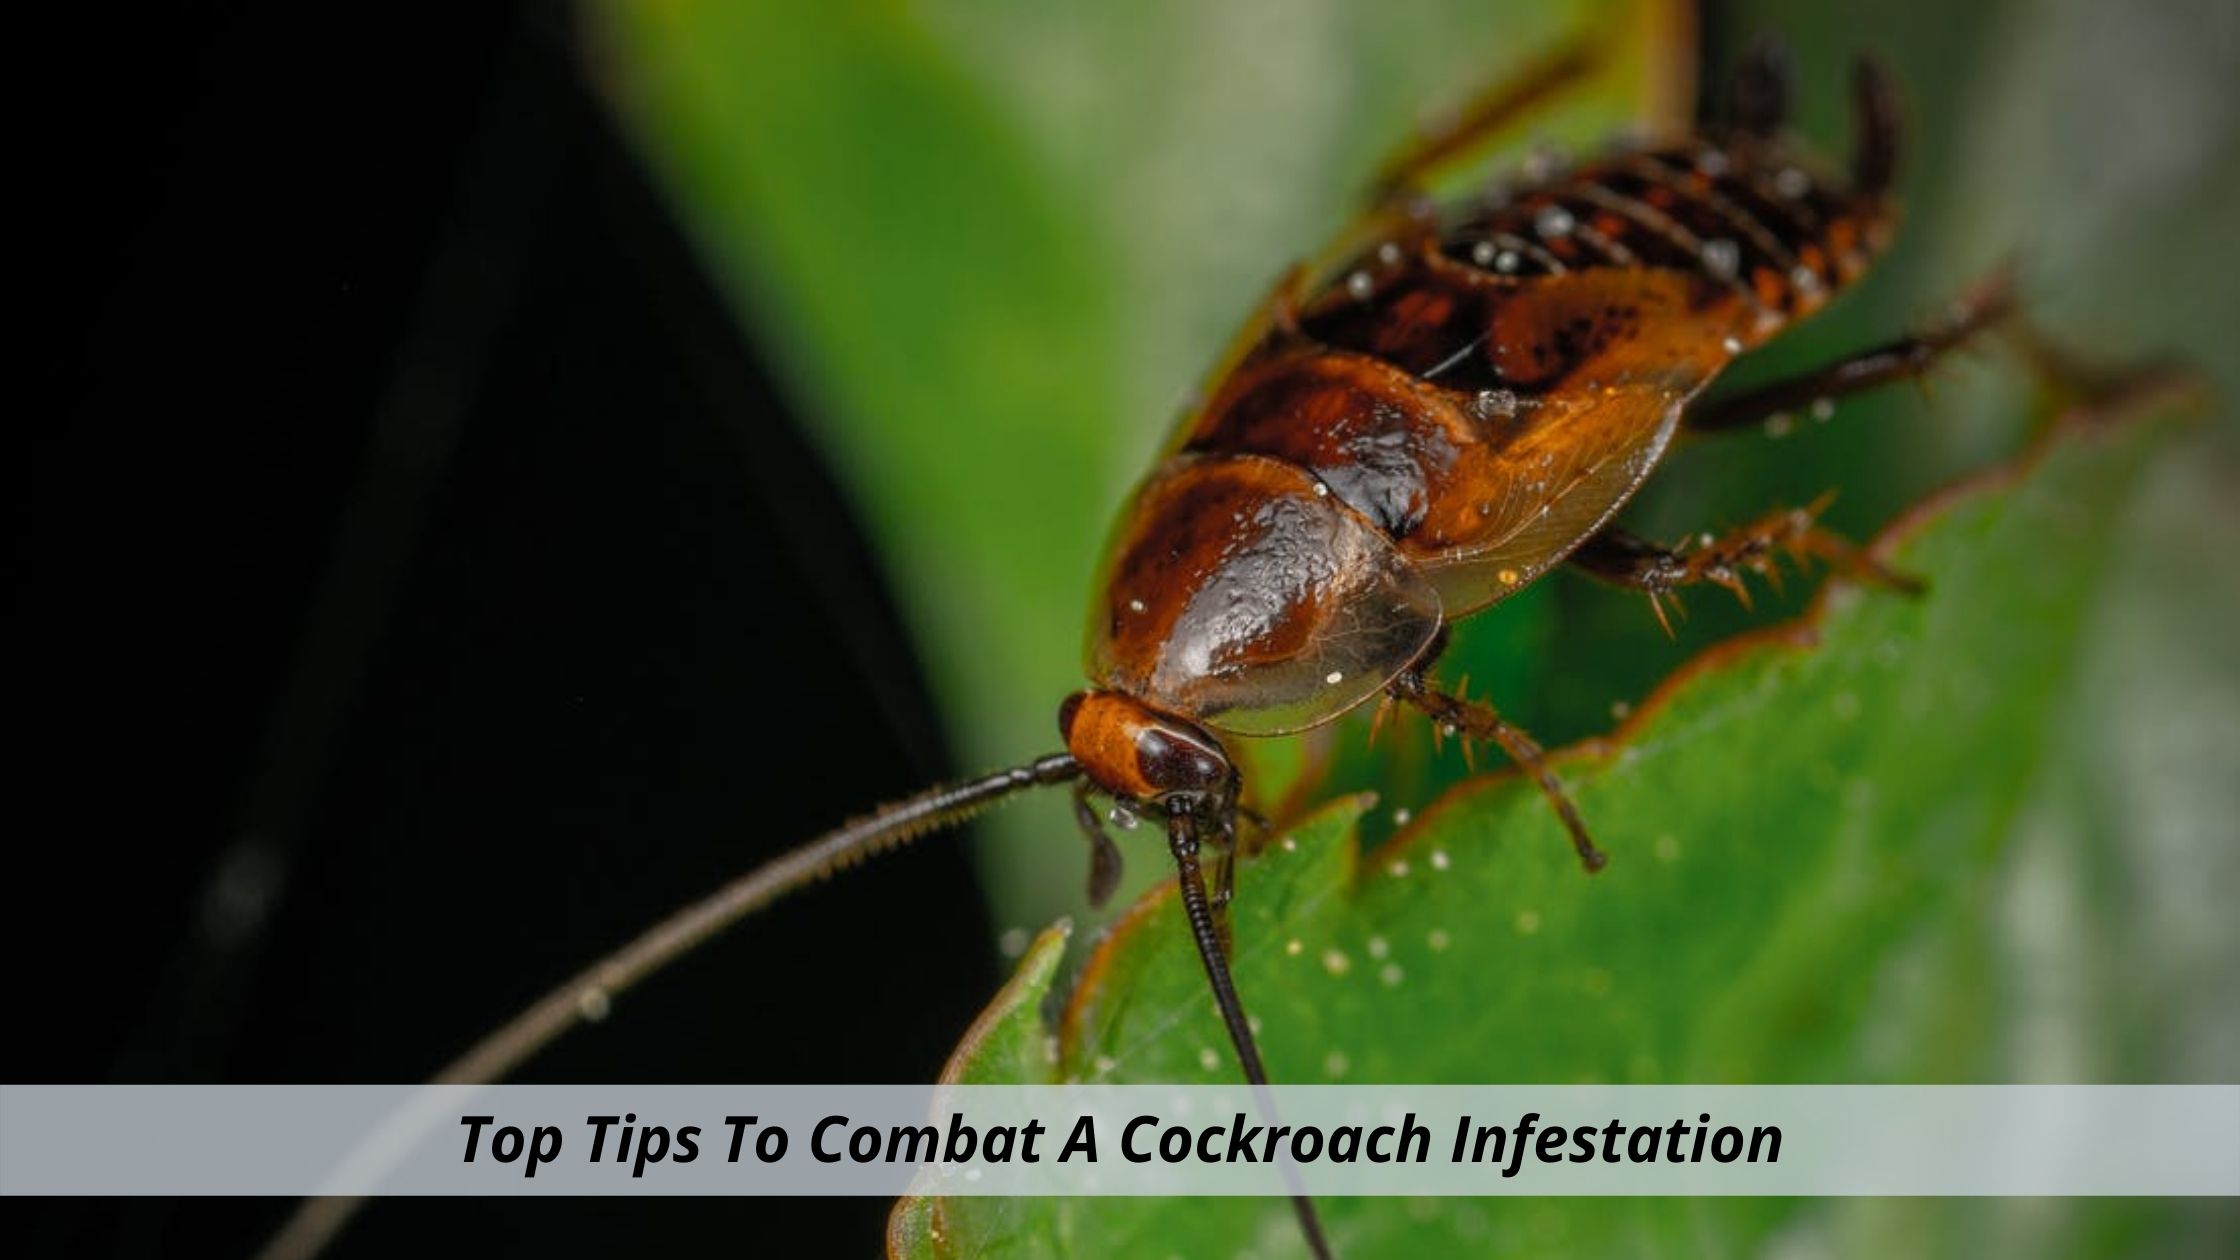 Top Tips To Combat A Cockroach Infestation